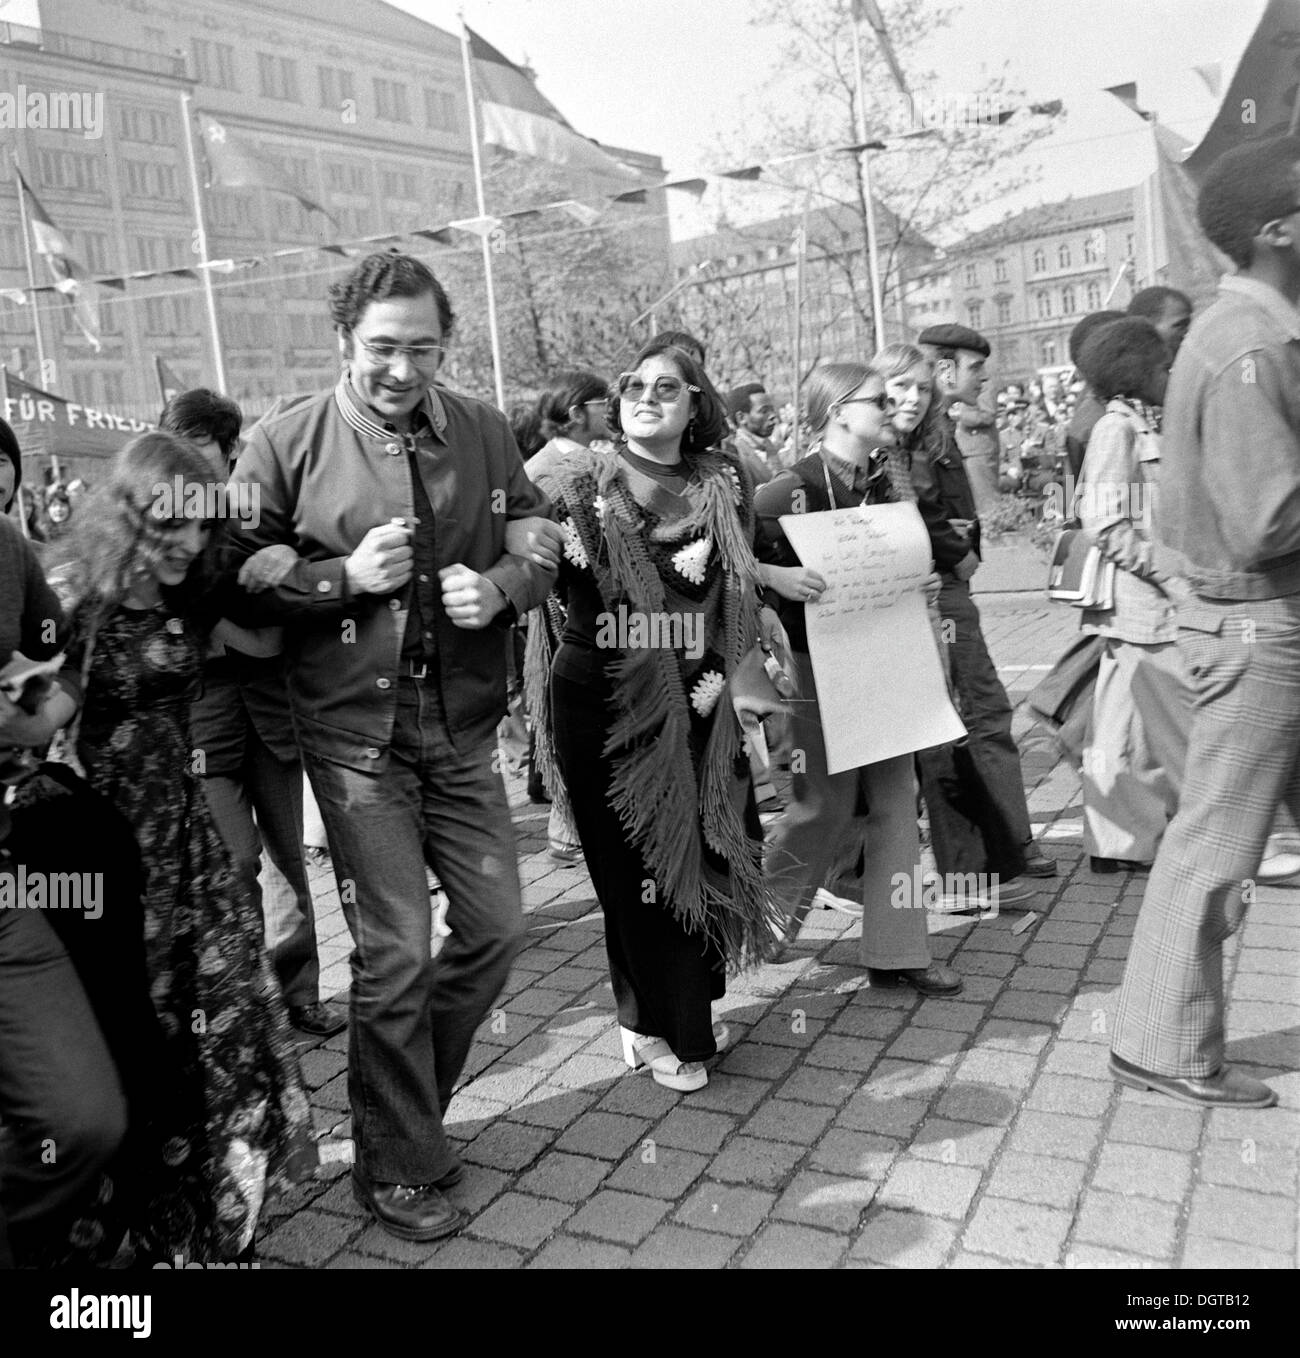 Students of Karl-Marx-University, May Day march, about 1976, Leipzig, GDR, East Germany Stock Photo